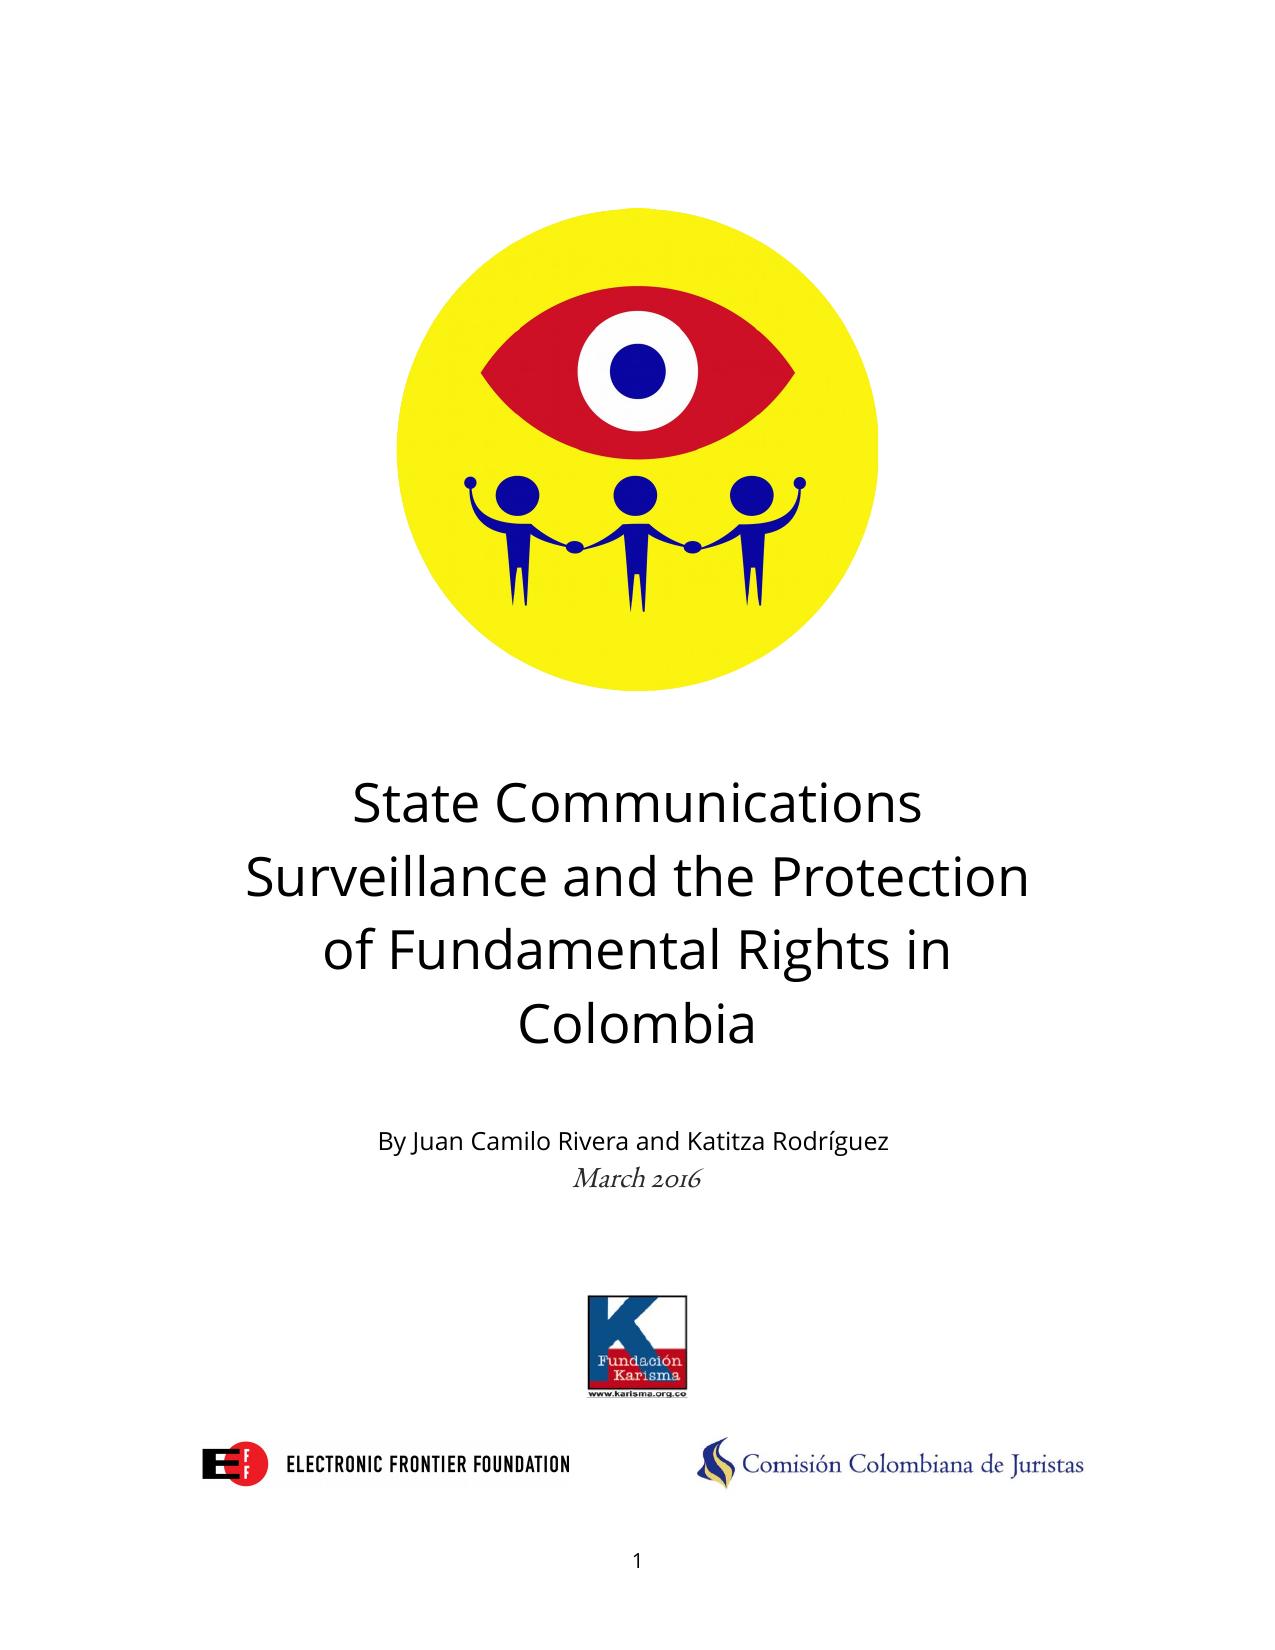 State Communications Surveillance and the Protection of Fundamental Rights in Colombia